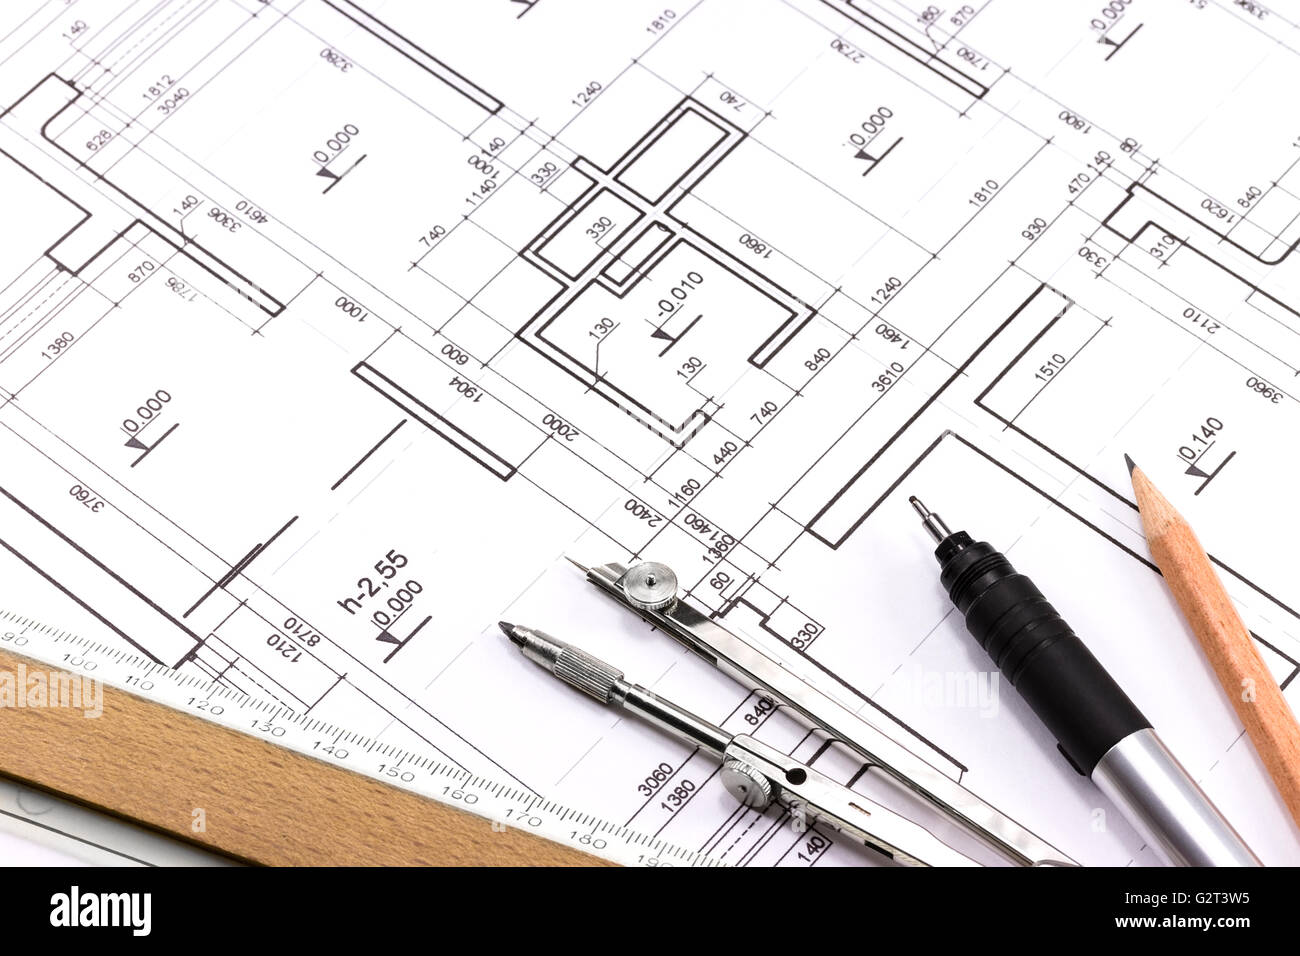 Architectural background with technical drawings and work tools Stock